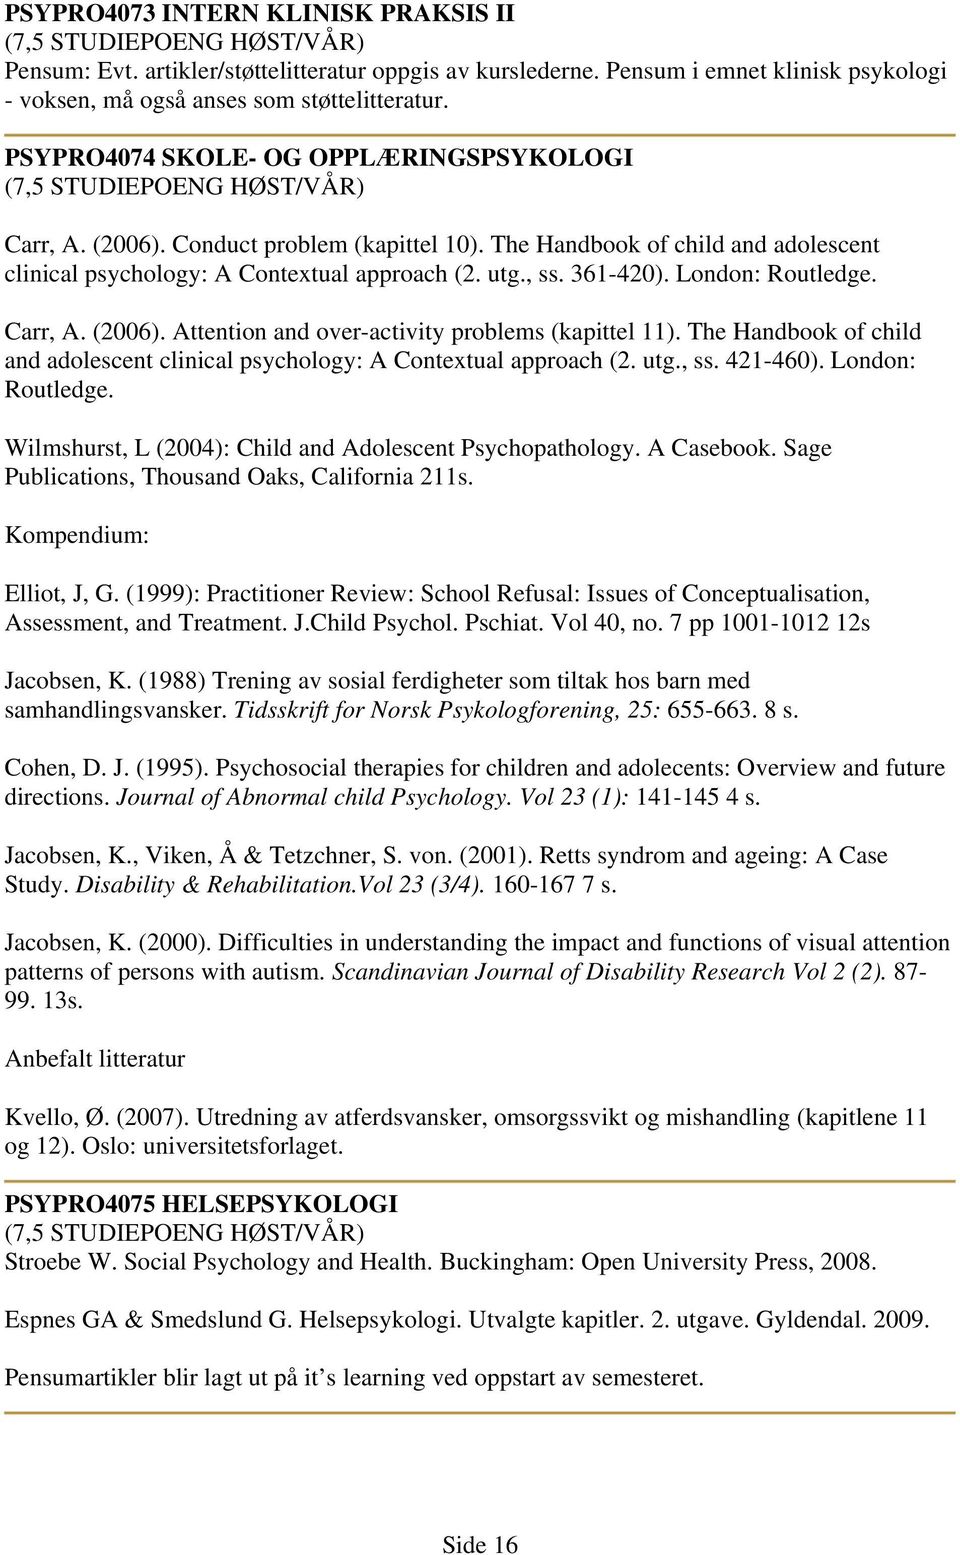 London: Routledge. Carr, A. (2006). Attention and over-activity problems (kapittel 11). The Handbook of child and adolescent clinical psychology: A Contextual approach (2. utg., ss. 421-460).